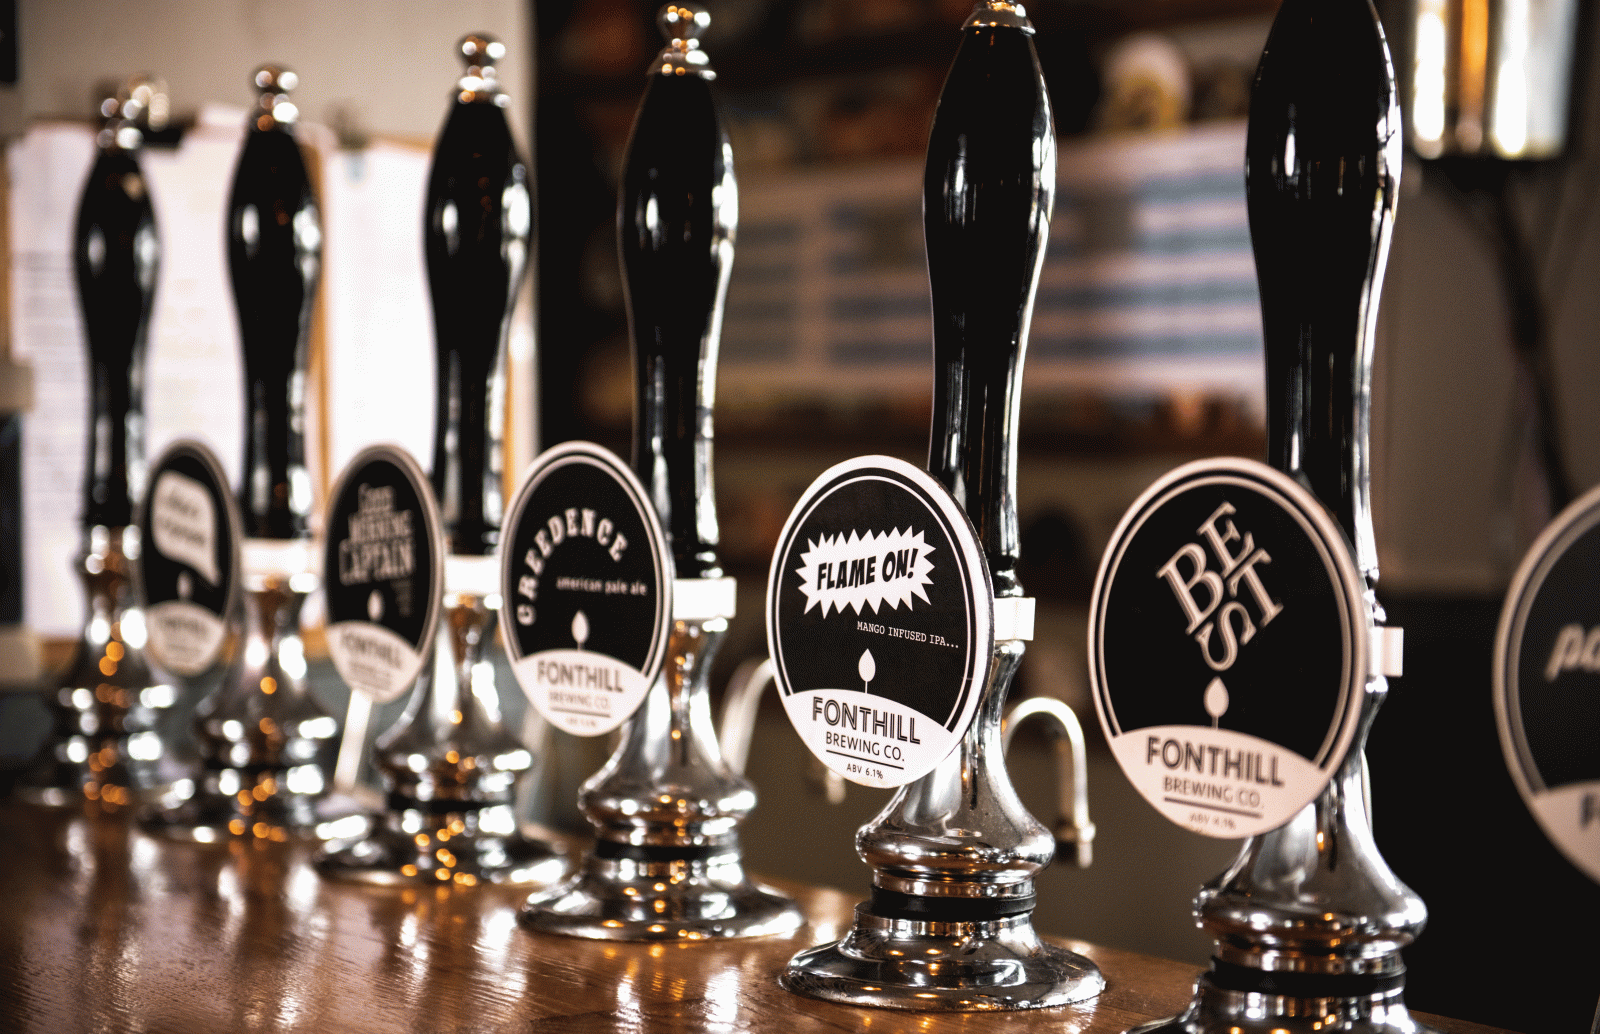 Fonthill Brewing Company's beers on the pumps